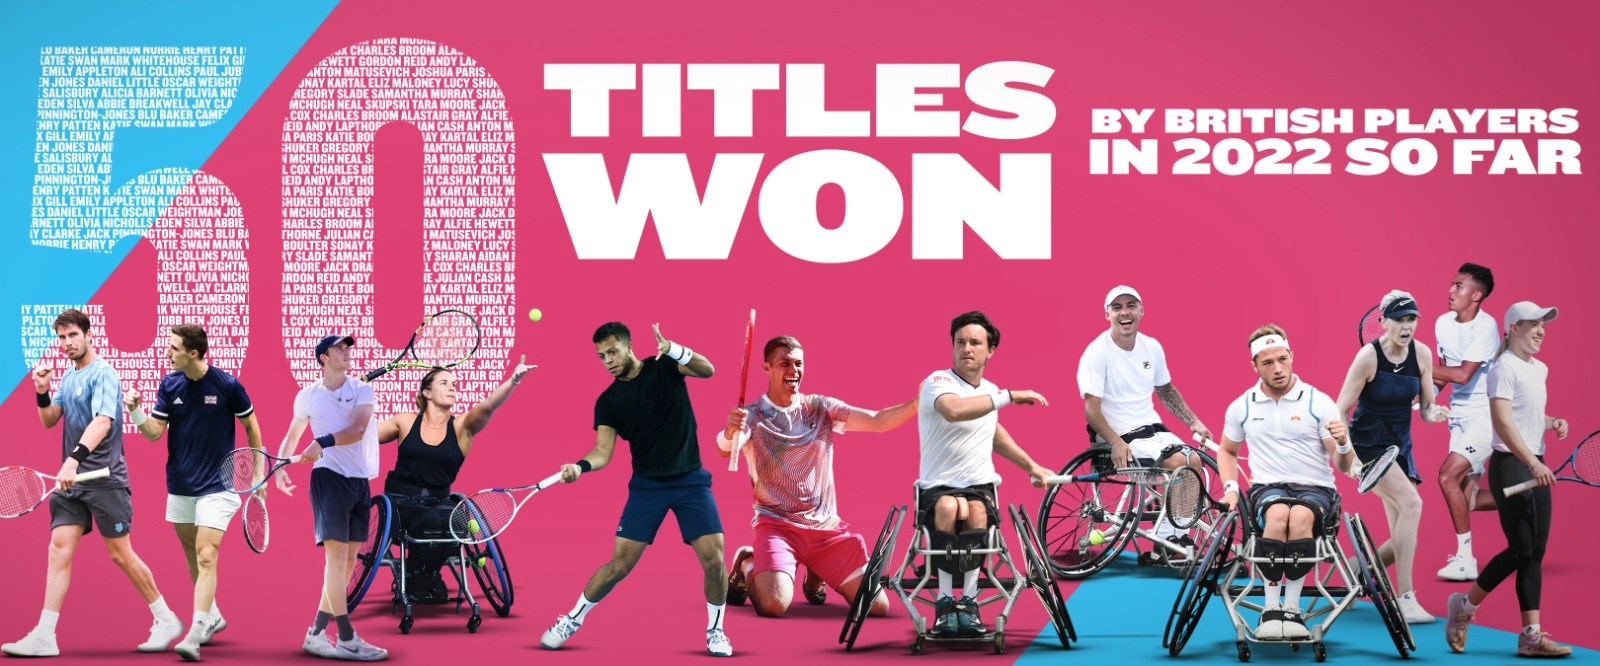 Graphic showing some of the British tennis champions from 2022